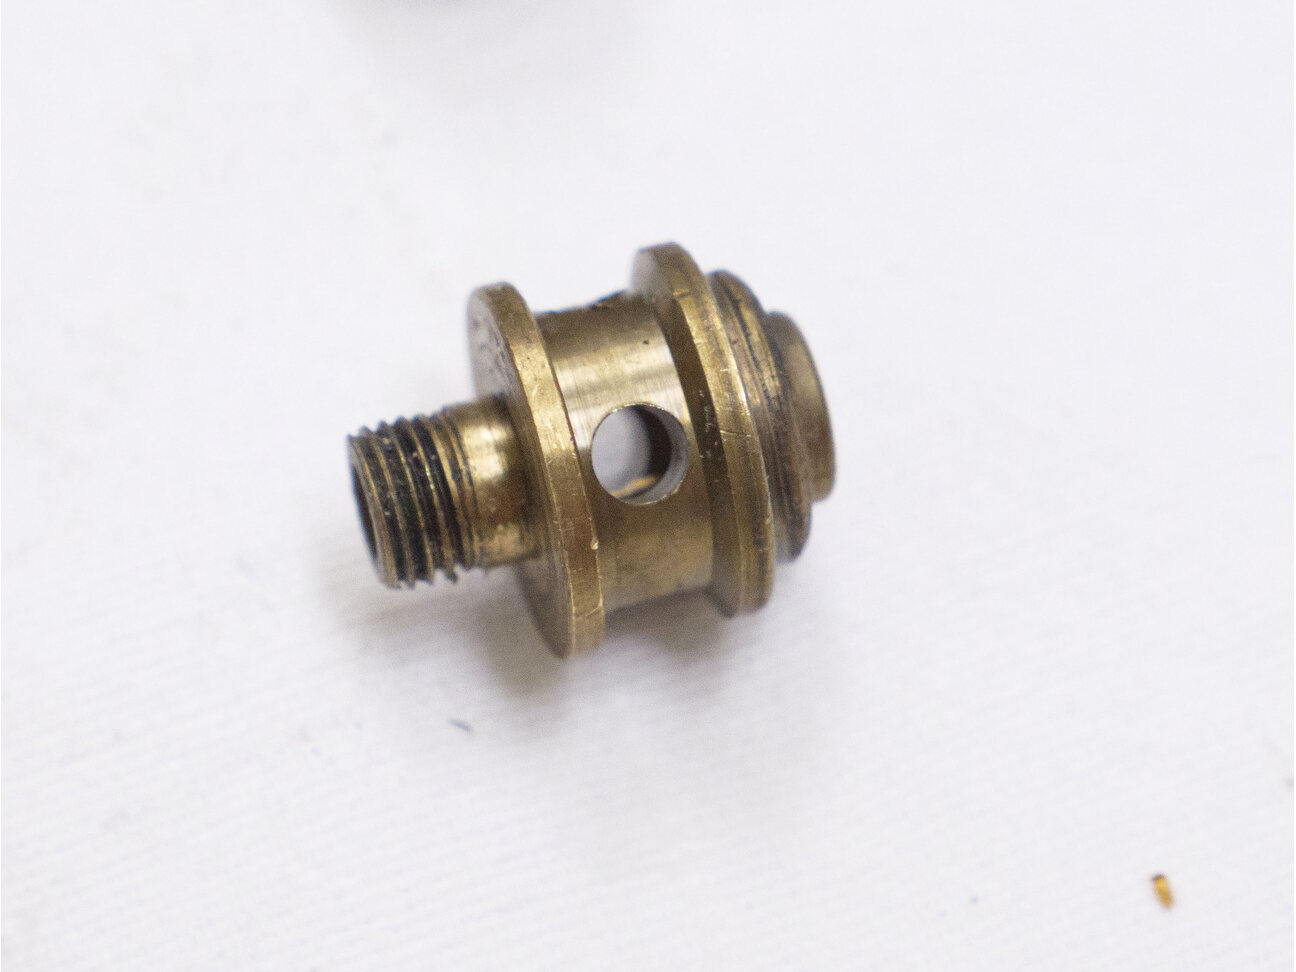 Sheridan stock Valves, used and tarnished, brass for classic PMI Sheridan pumps